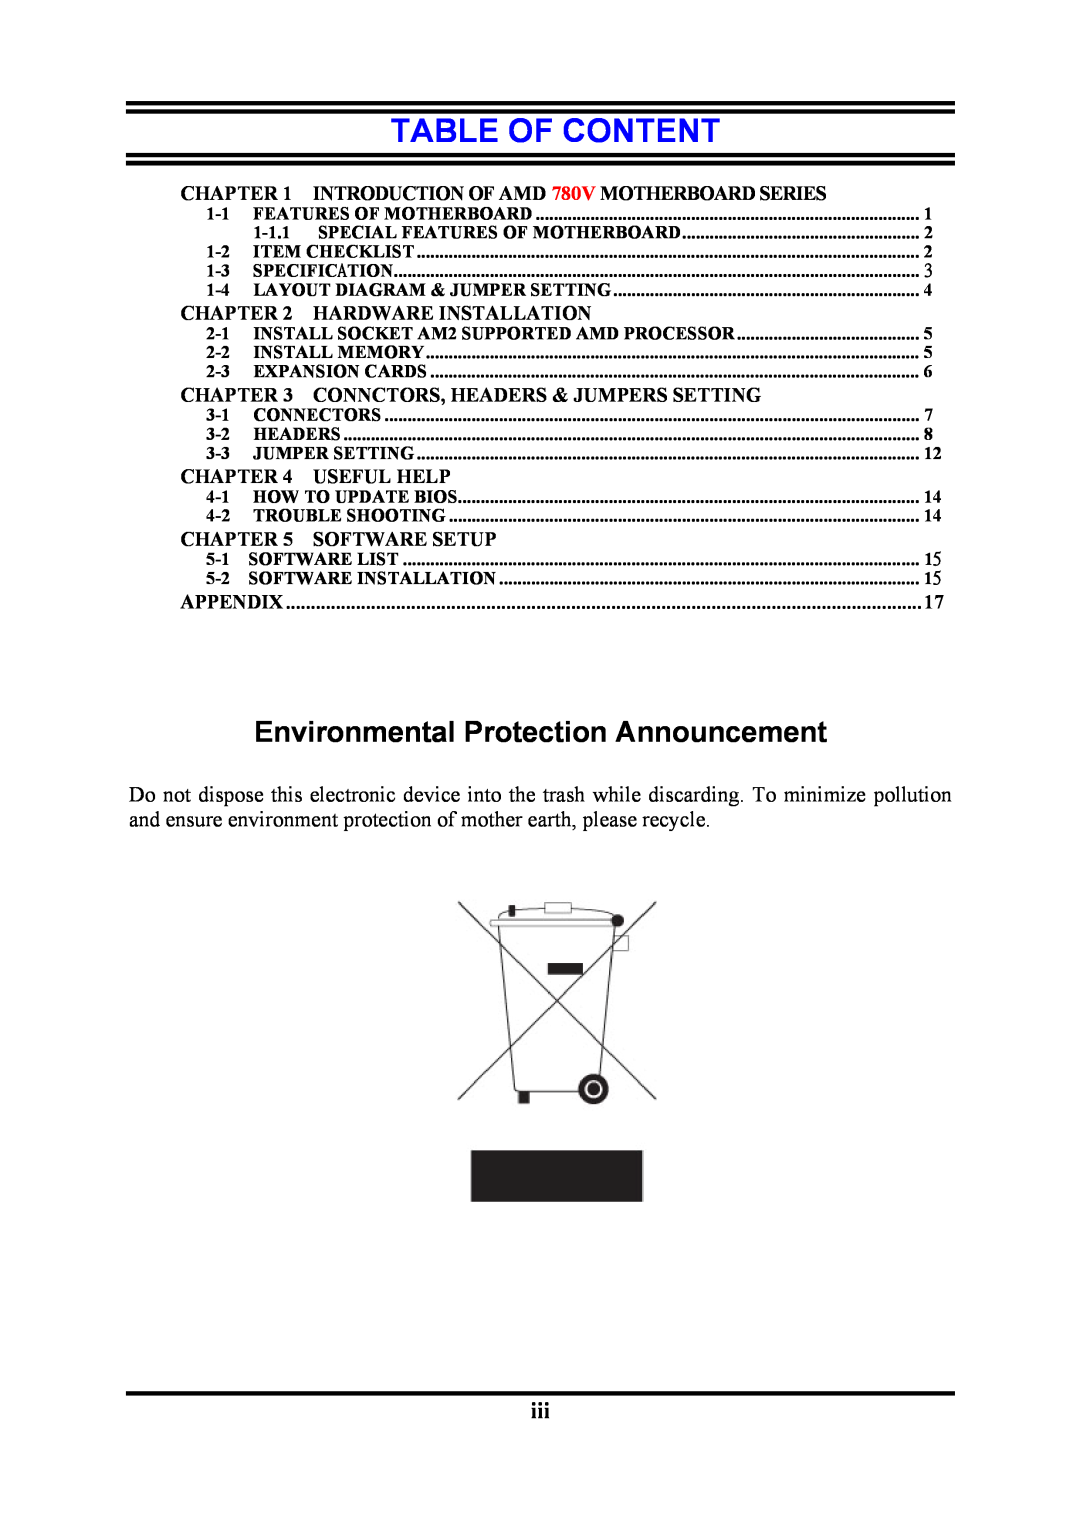 AMD KM780V user manual Table Of Content, Environmental Protection Announcement, INTRODUCTION OF AMD 780V MOTHERBOARD SERIES 